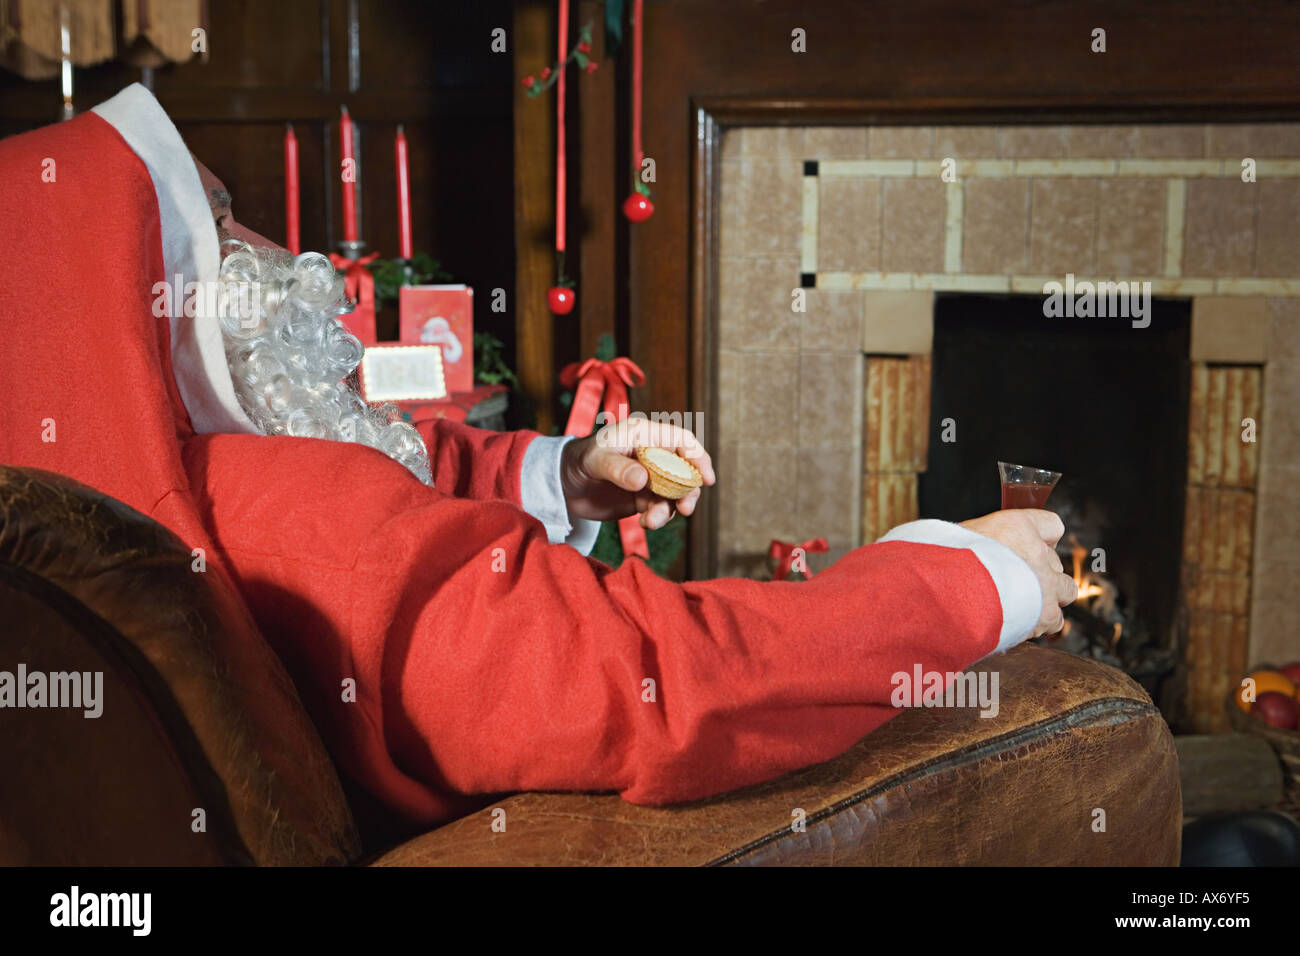 Santa claus resting by the fireplace Stock Photo